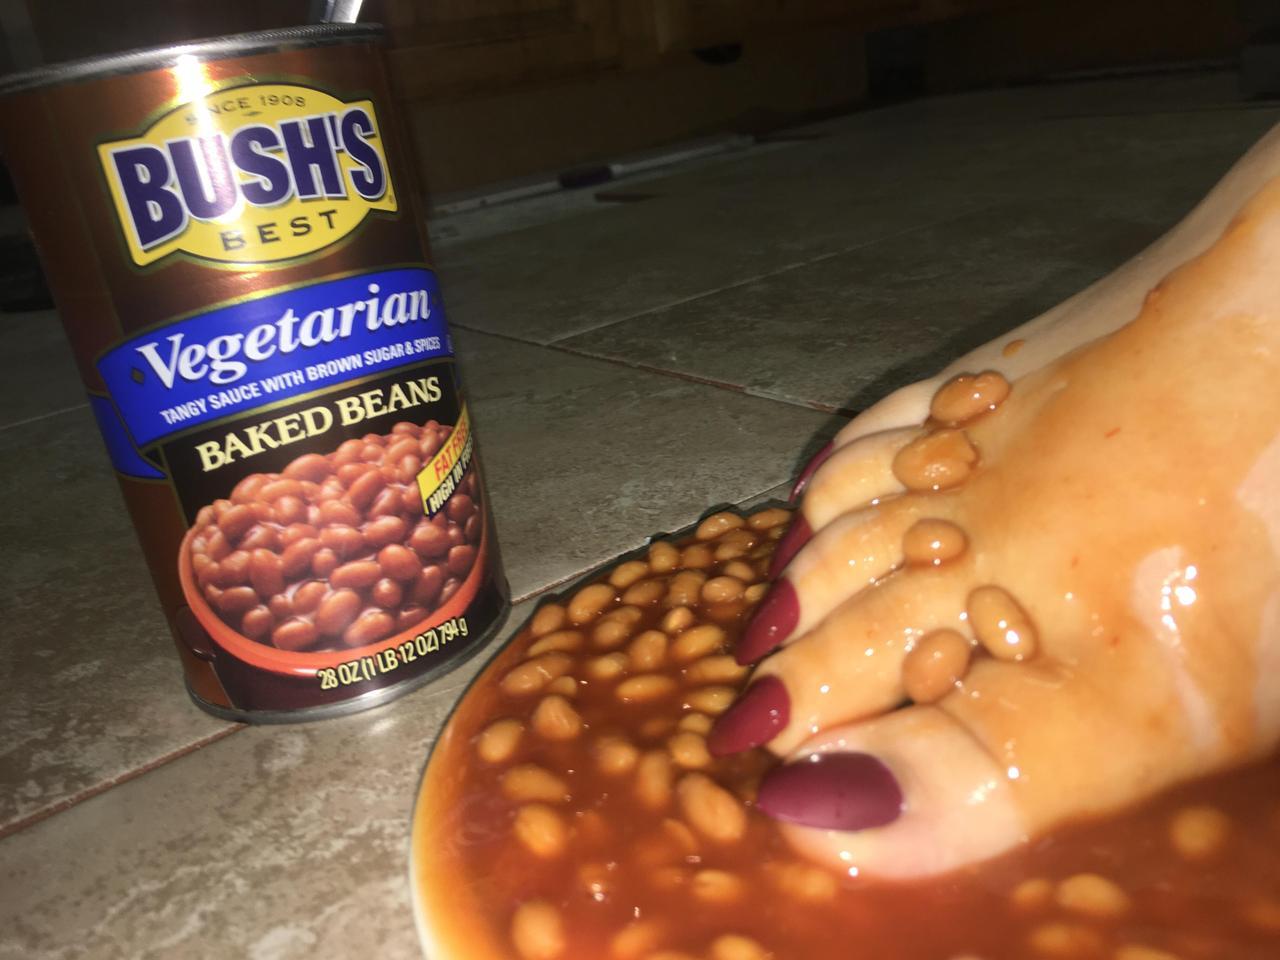 cursed image - cursed beans - Ce 1905 Bu Shs Best Vegetarian Tangy Sauce With Brown Sugar & Spices Baked Beans 28 Oz 1 Lb 120Z 7949